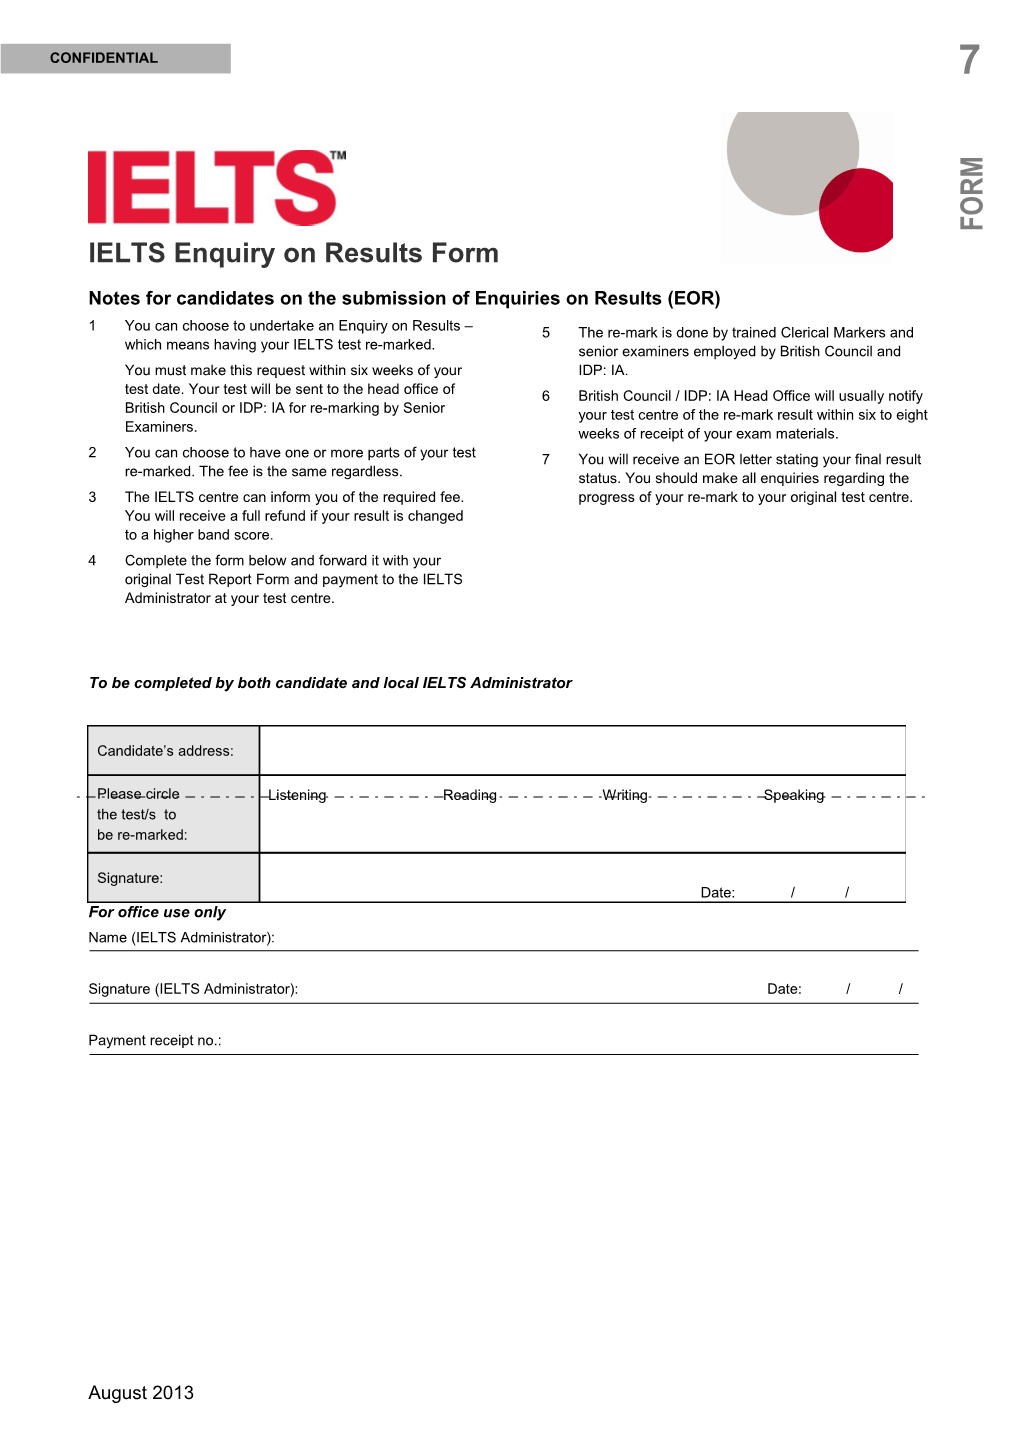 IELTS Enquiry on Results Form